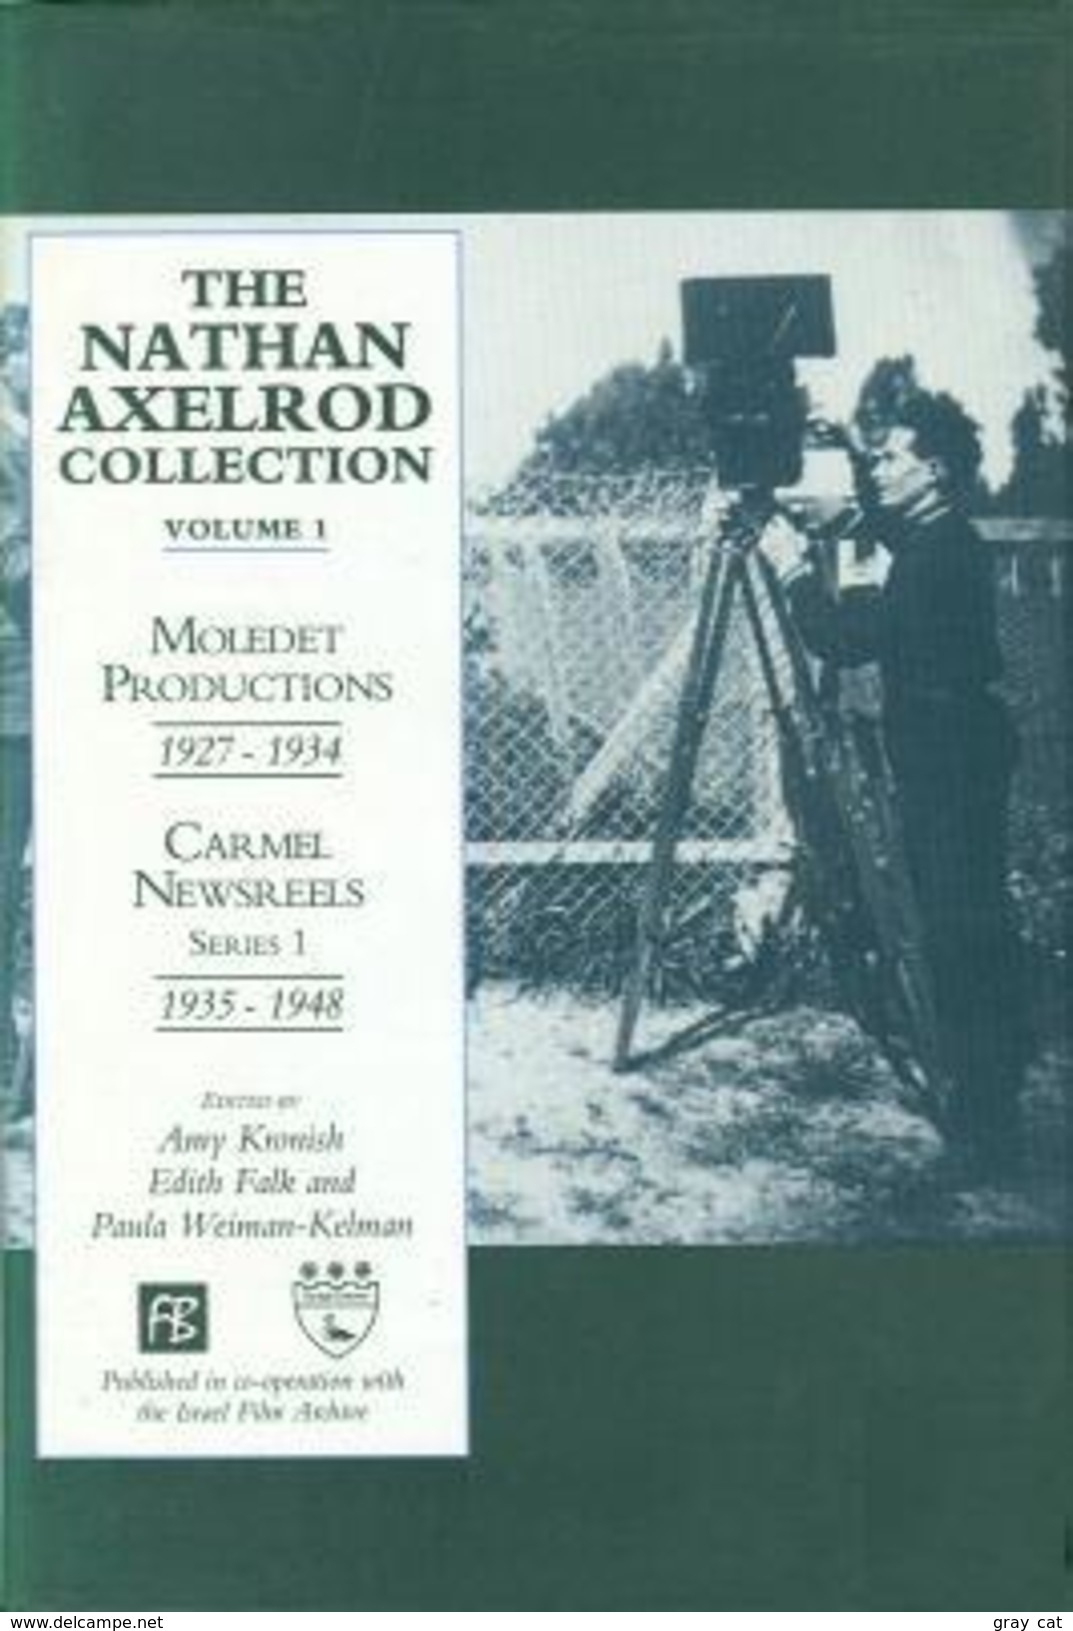 The Nathan Axelrod Collection: Moledet Productions, 1927-34, Carmel Newsreels, Series 1, 1935-48 Volume. 1 By Kronish, A - Fotografie